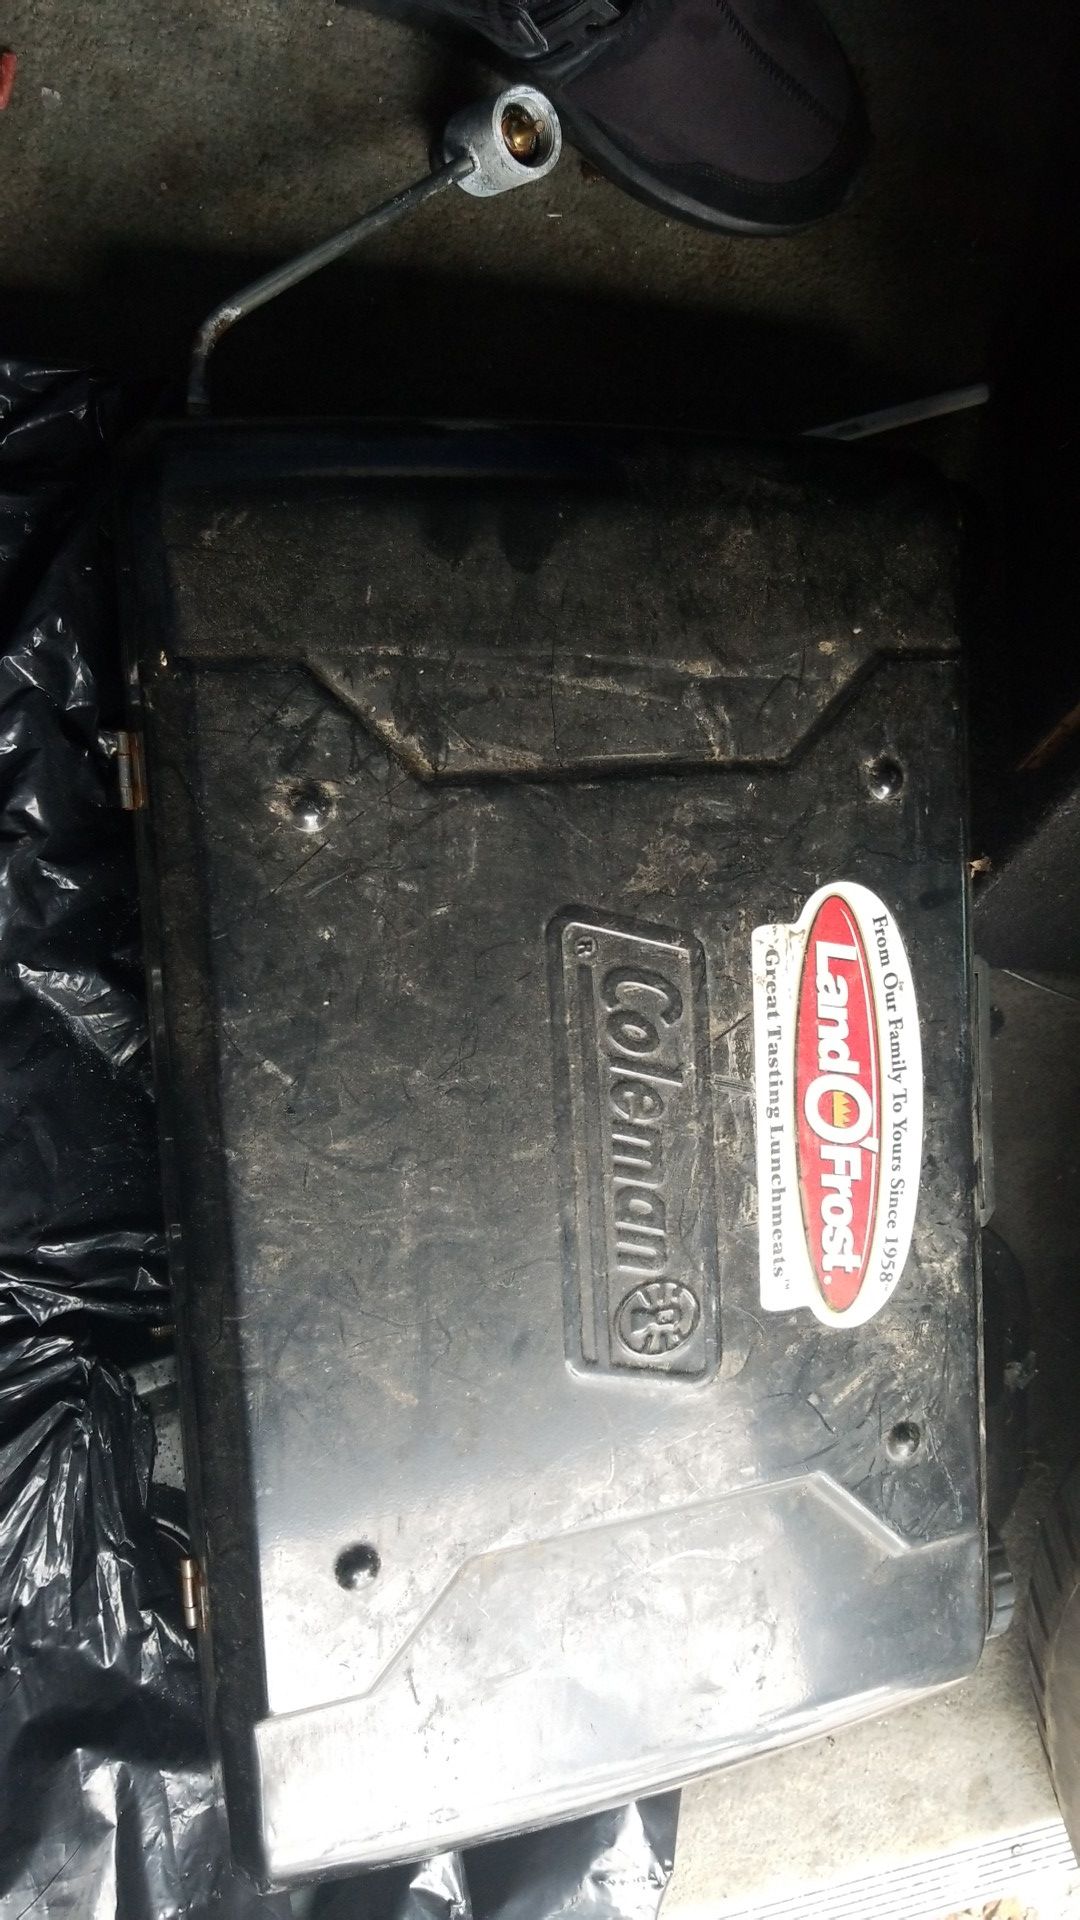 Coleman grill and stove